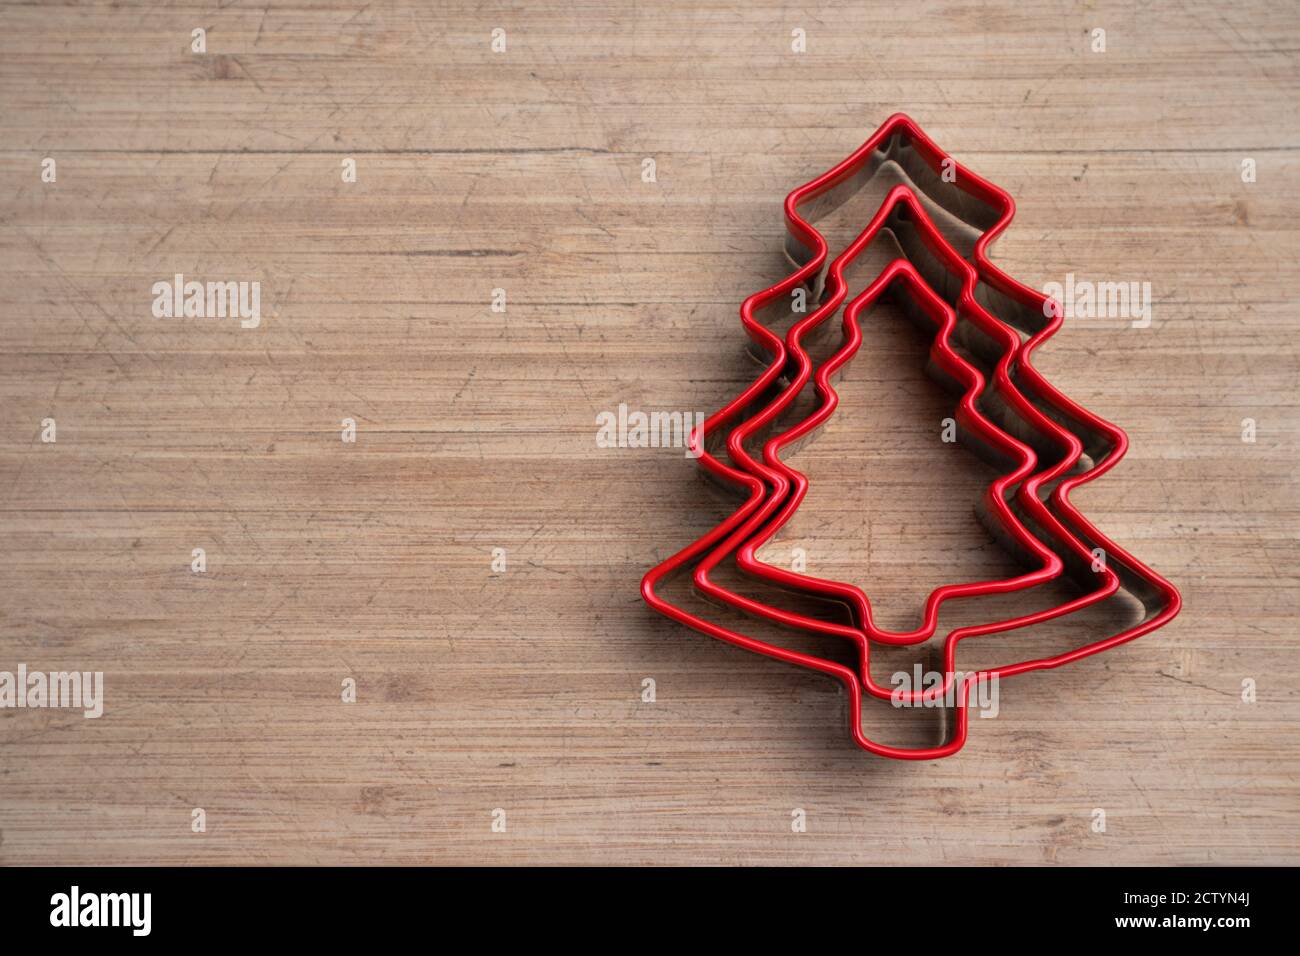 Red Christmas tree cookie cutter on wood cutting board.  Holiday concept. Copy space. Stock Photo